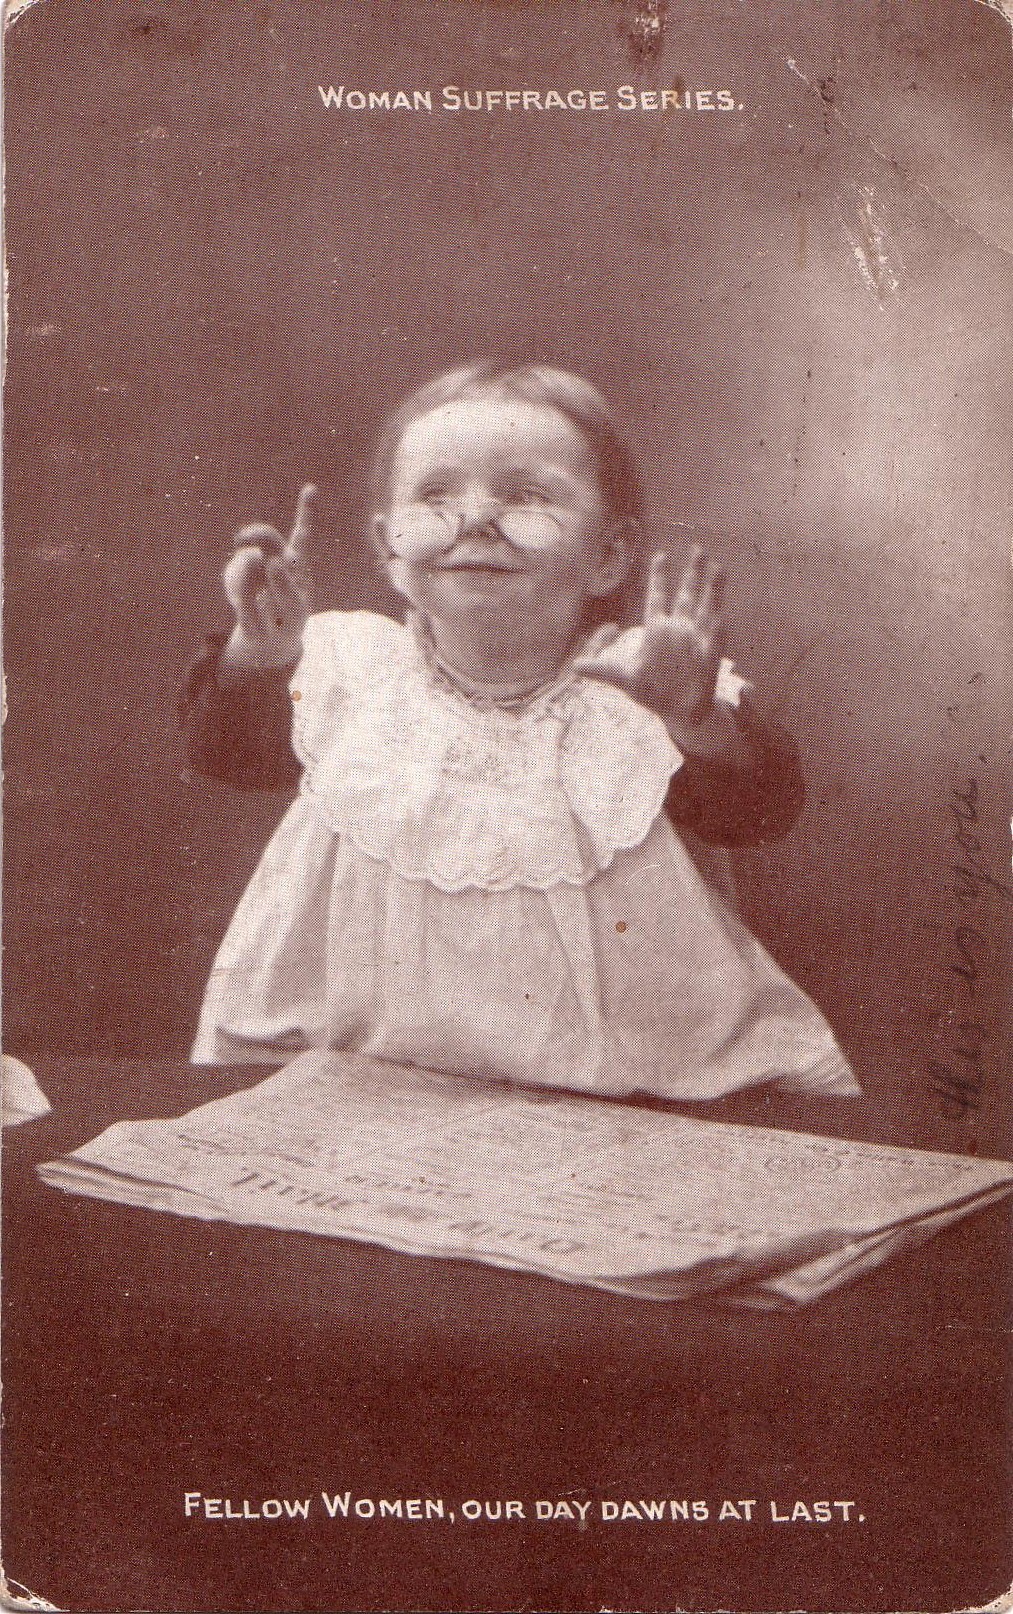 Black and white image of a young girl sitting at a desk in a school setting. Her eyes look inquisitive and she is raising her hand as if to answer a question.